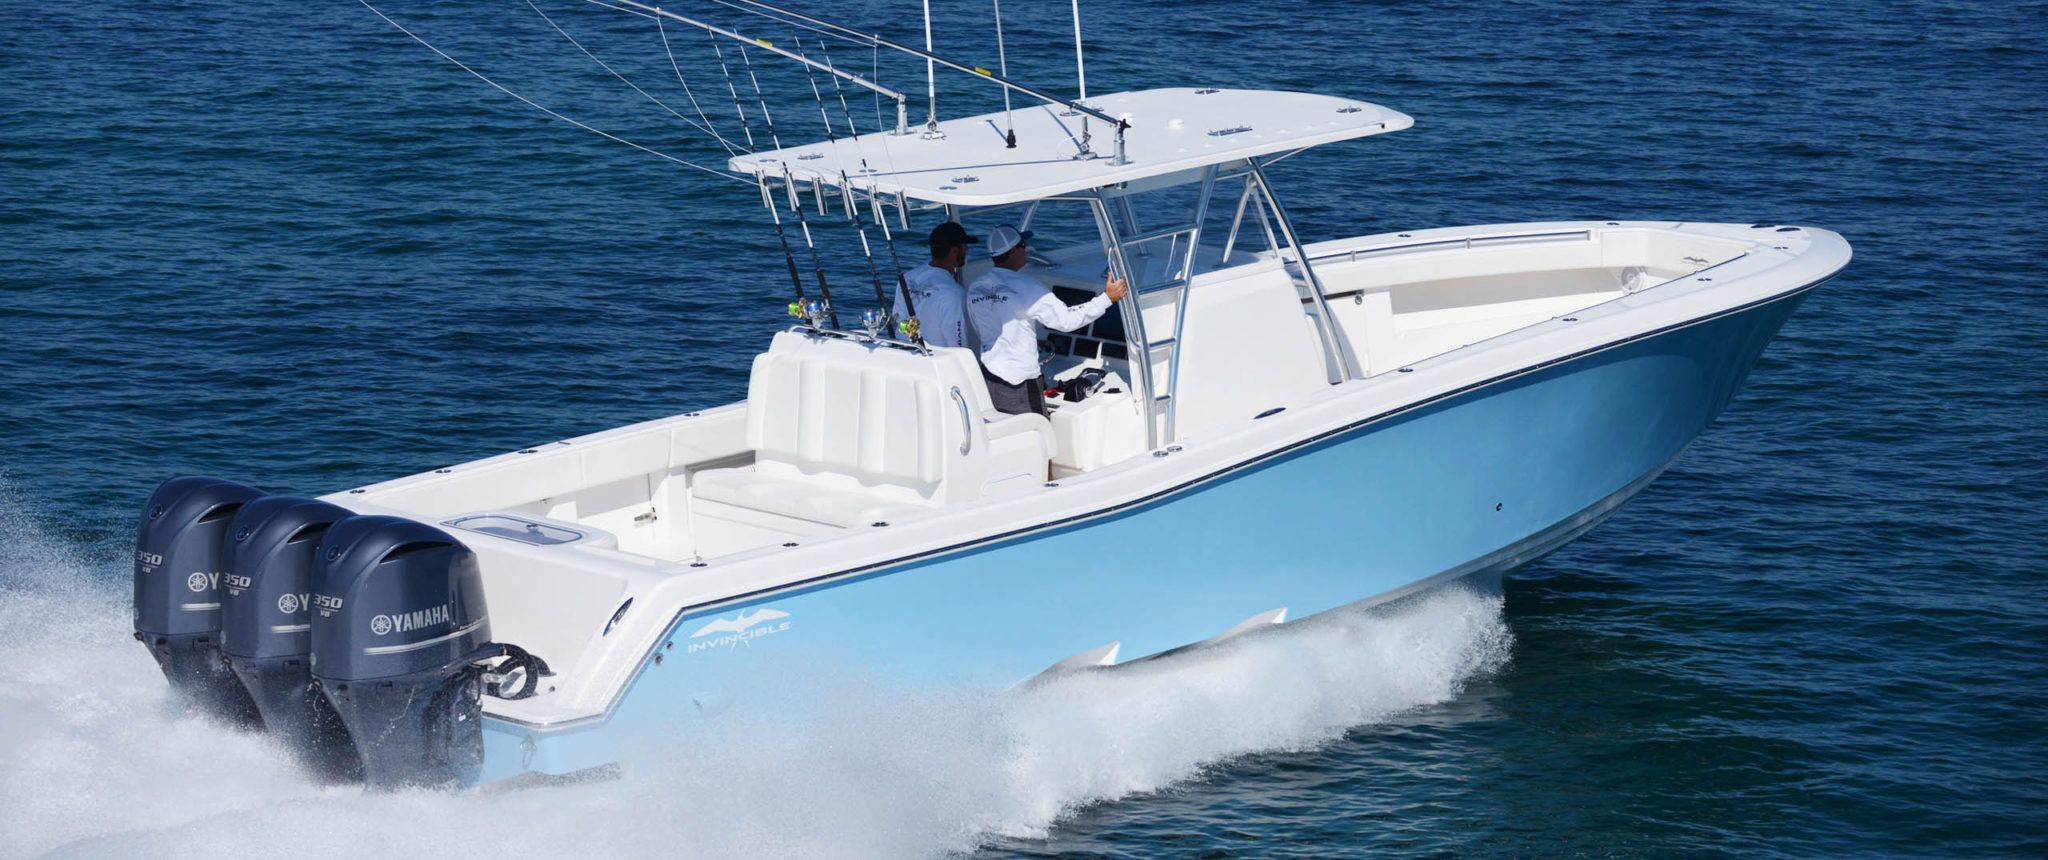 Invincible Boats Home Fishability, Performance, and ...